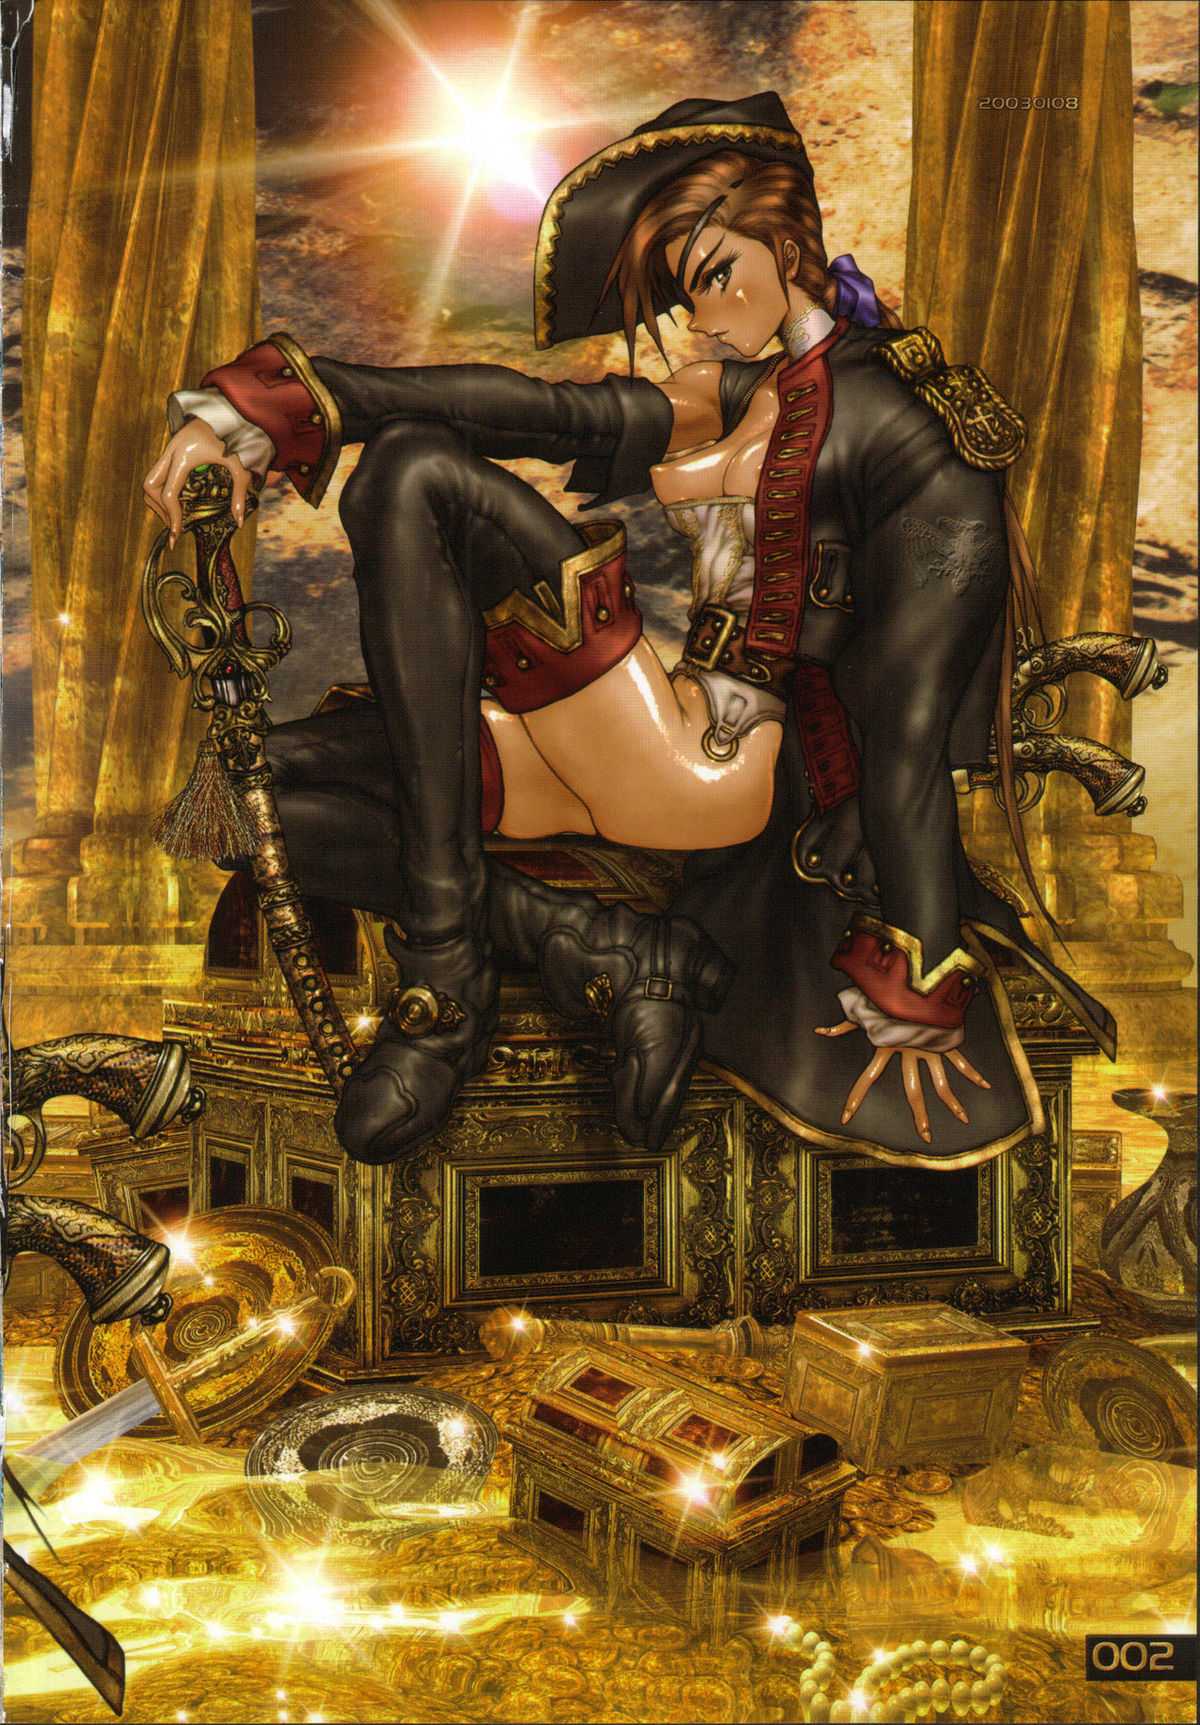 [Masamune Shirow] PIECES 6 HELL CAT [士郎正宗] PIECES 6 HELL CAT [11-06-08]